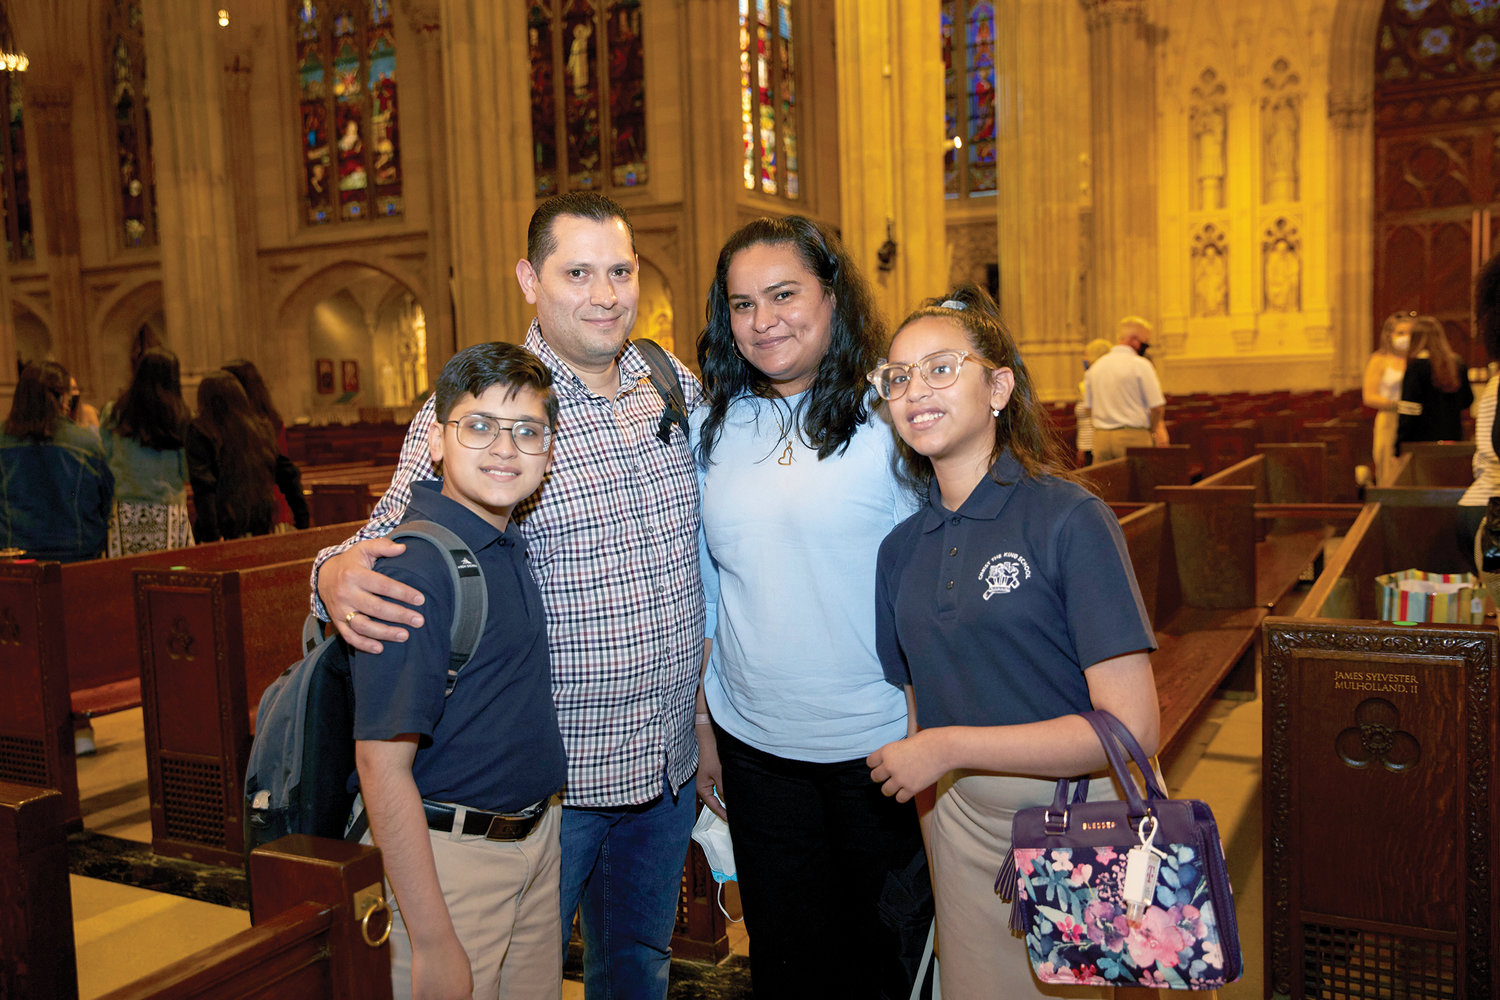 Eligio and Mercedes Solis stand with their children, Salette and Eli, after a Mass celebrating the 50th anniversary of the Inner-City Scholarship Fund at St. Patrick’s Cathedral May 25. Salette and Eli are scholarship recipients who attend Christ the King School in the Bronx, and they were altar servers at the Mass.